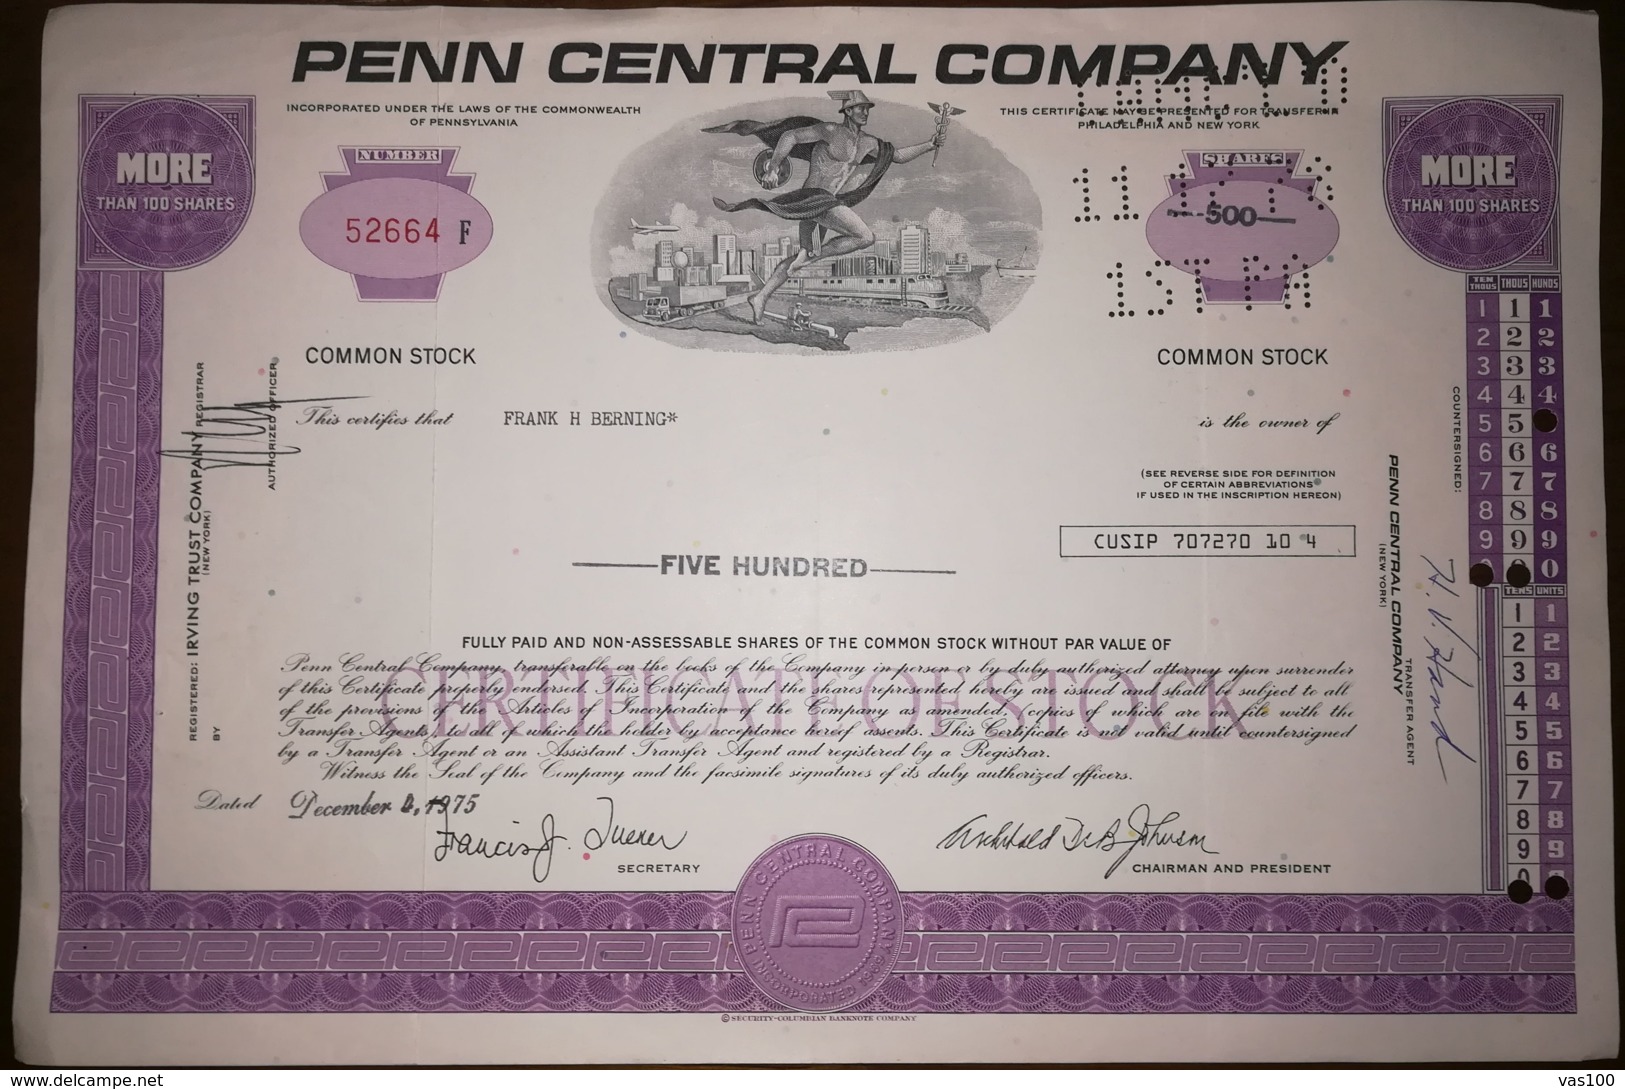 SHAREHOLDINGS, COMMON STOCK AT PENN CENTRAL COMPANY, RAILWAY, TRAINS, 1975, USA - Transports